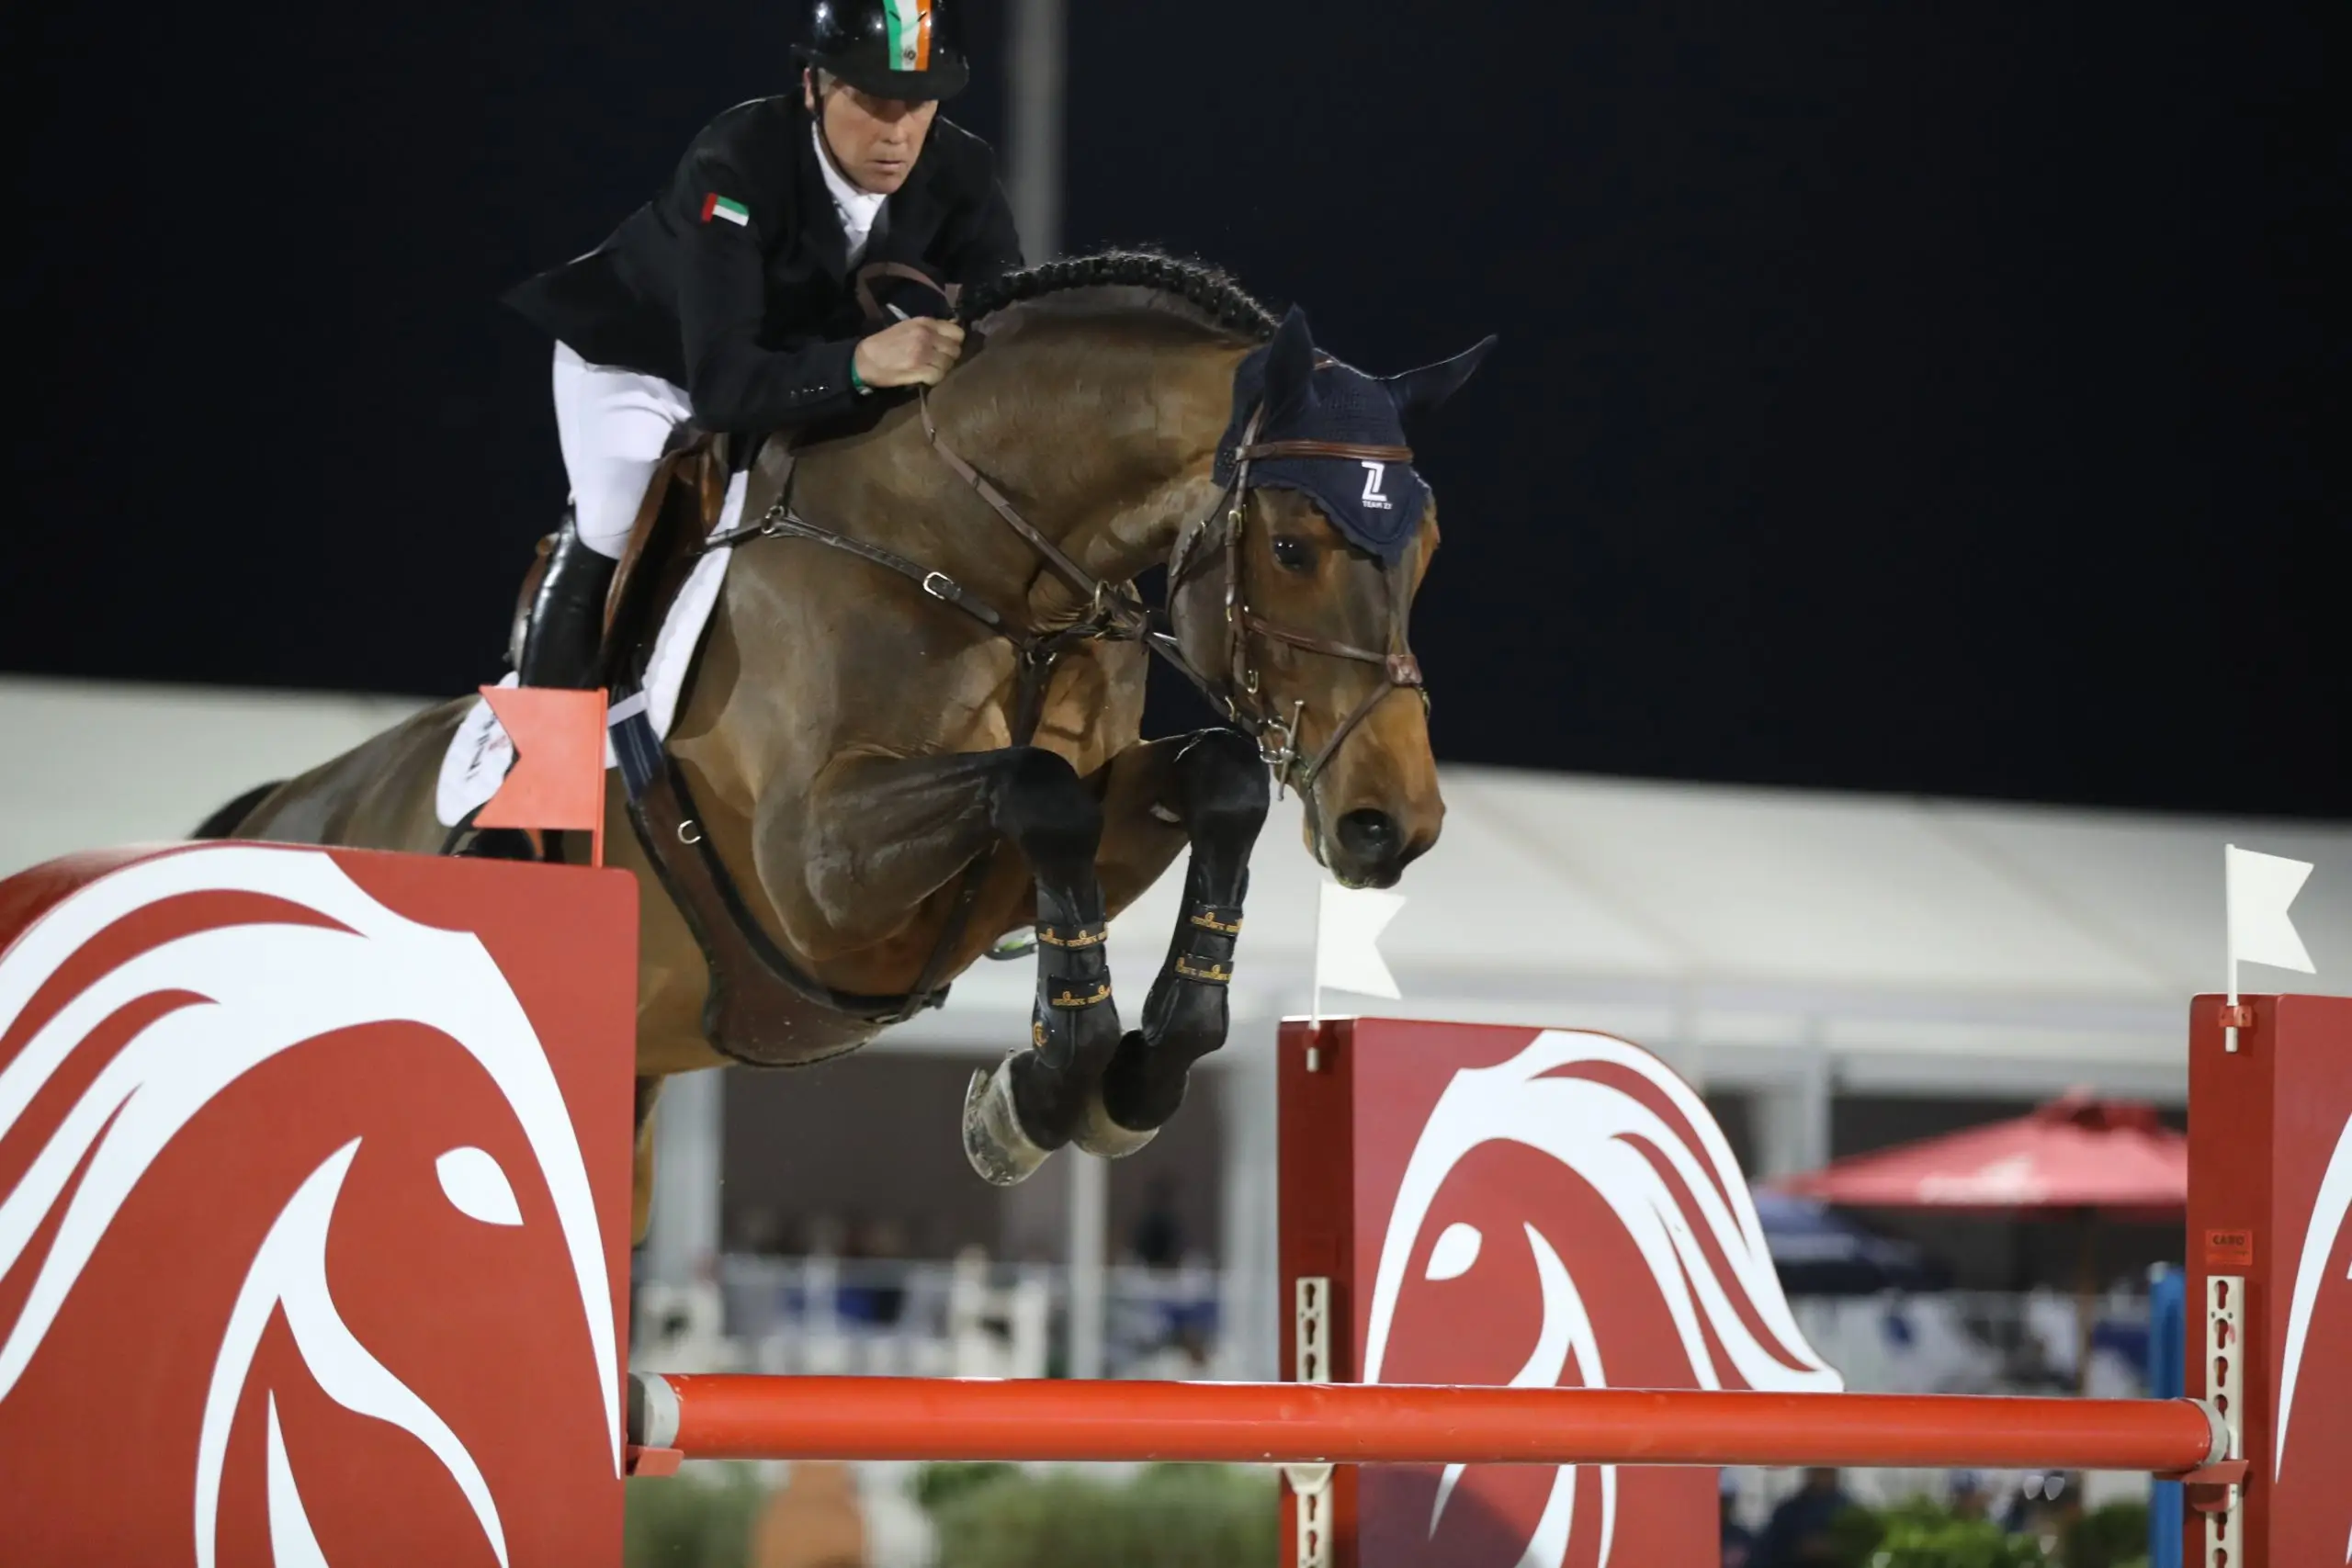 Shane Breen stars at the head of RED MILLS Hickstead success